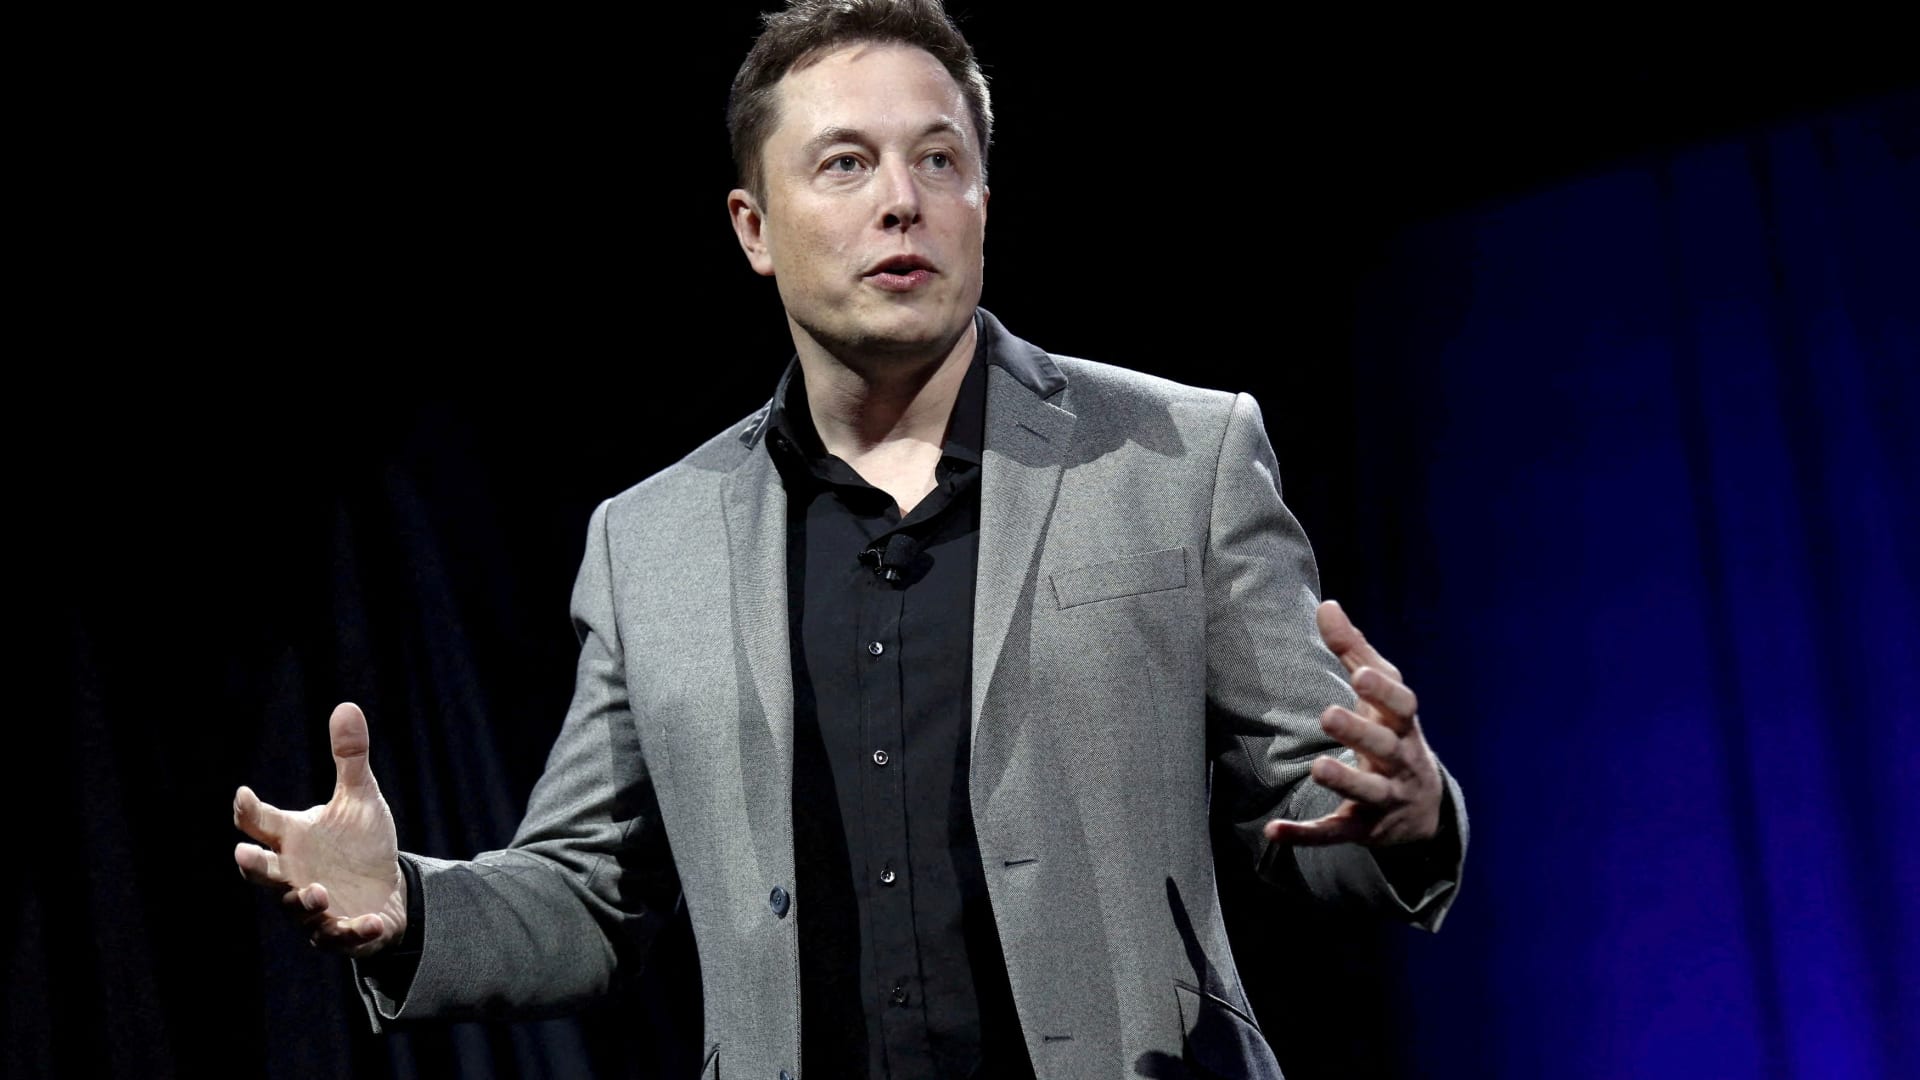 Musk says Tesla's factories in Berlin and Texas are 'gigantic money furnaces'